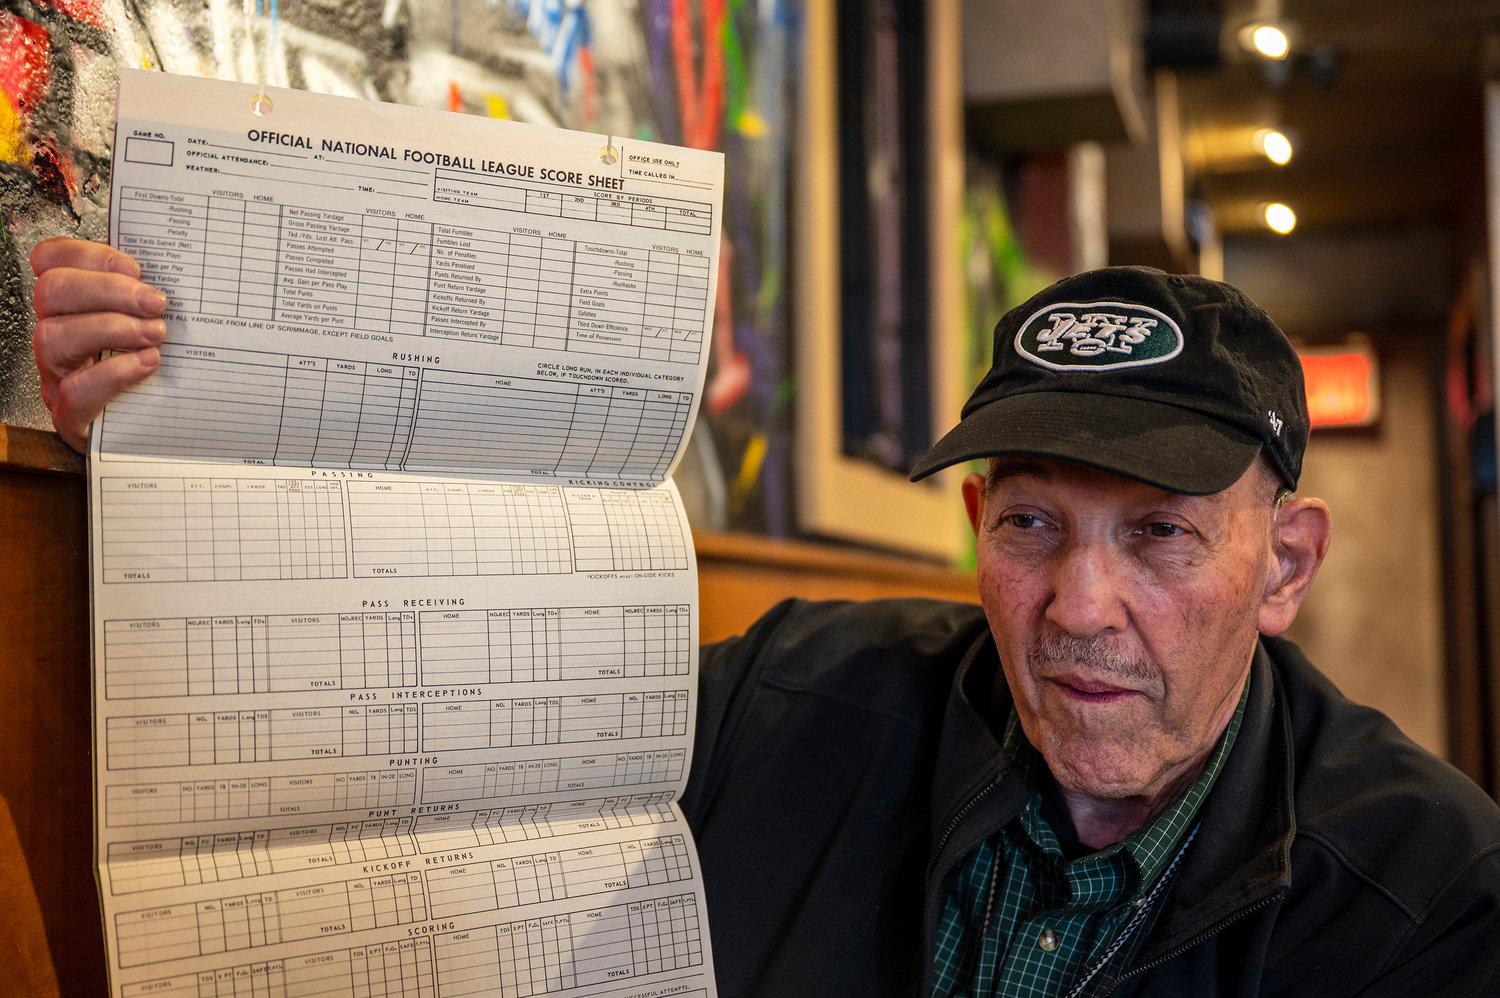 It's been a couple years since he retired, but Fred Smith still finds himself spending more time wondering how statisticians are scoring football plays than simply watching the game, thanks to his years working behind the scenes with the Jets.